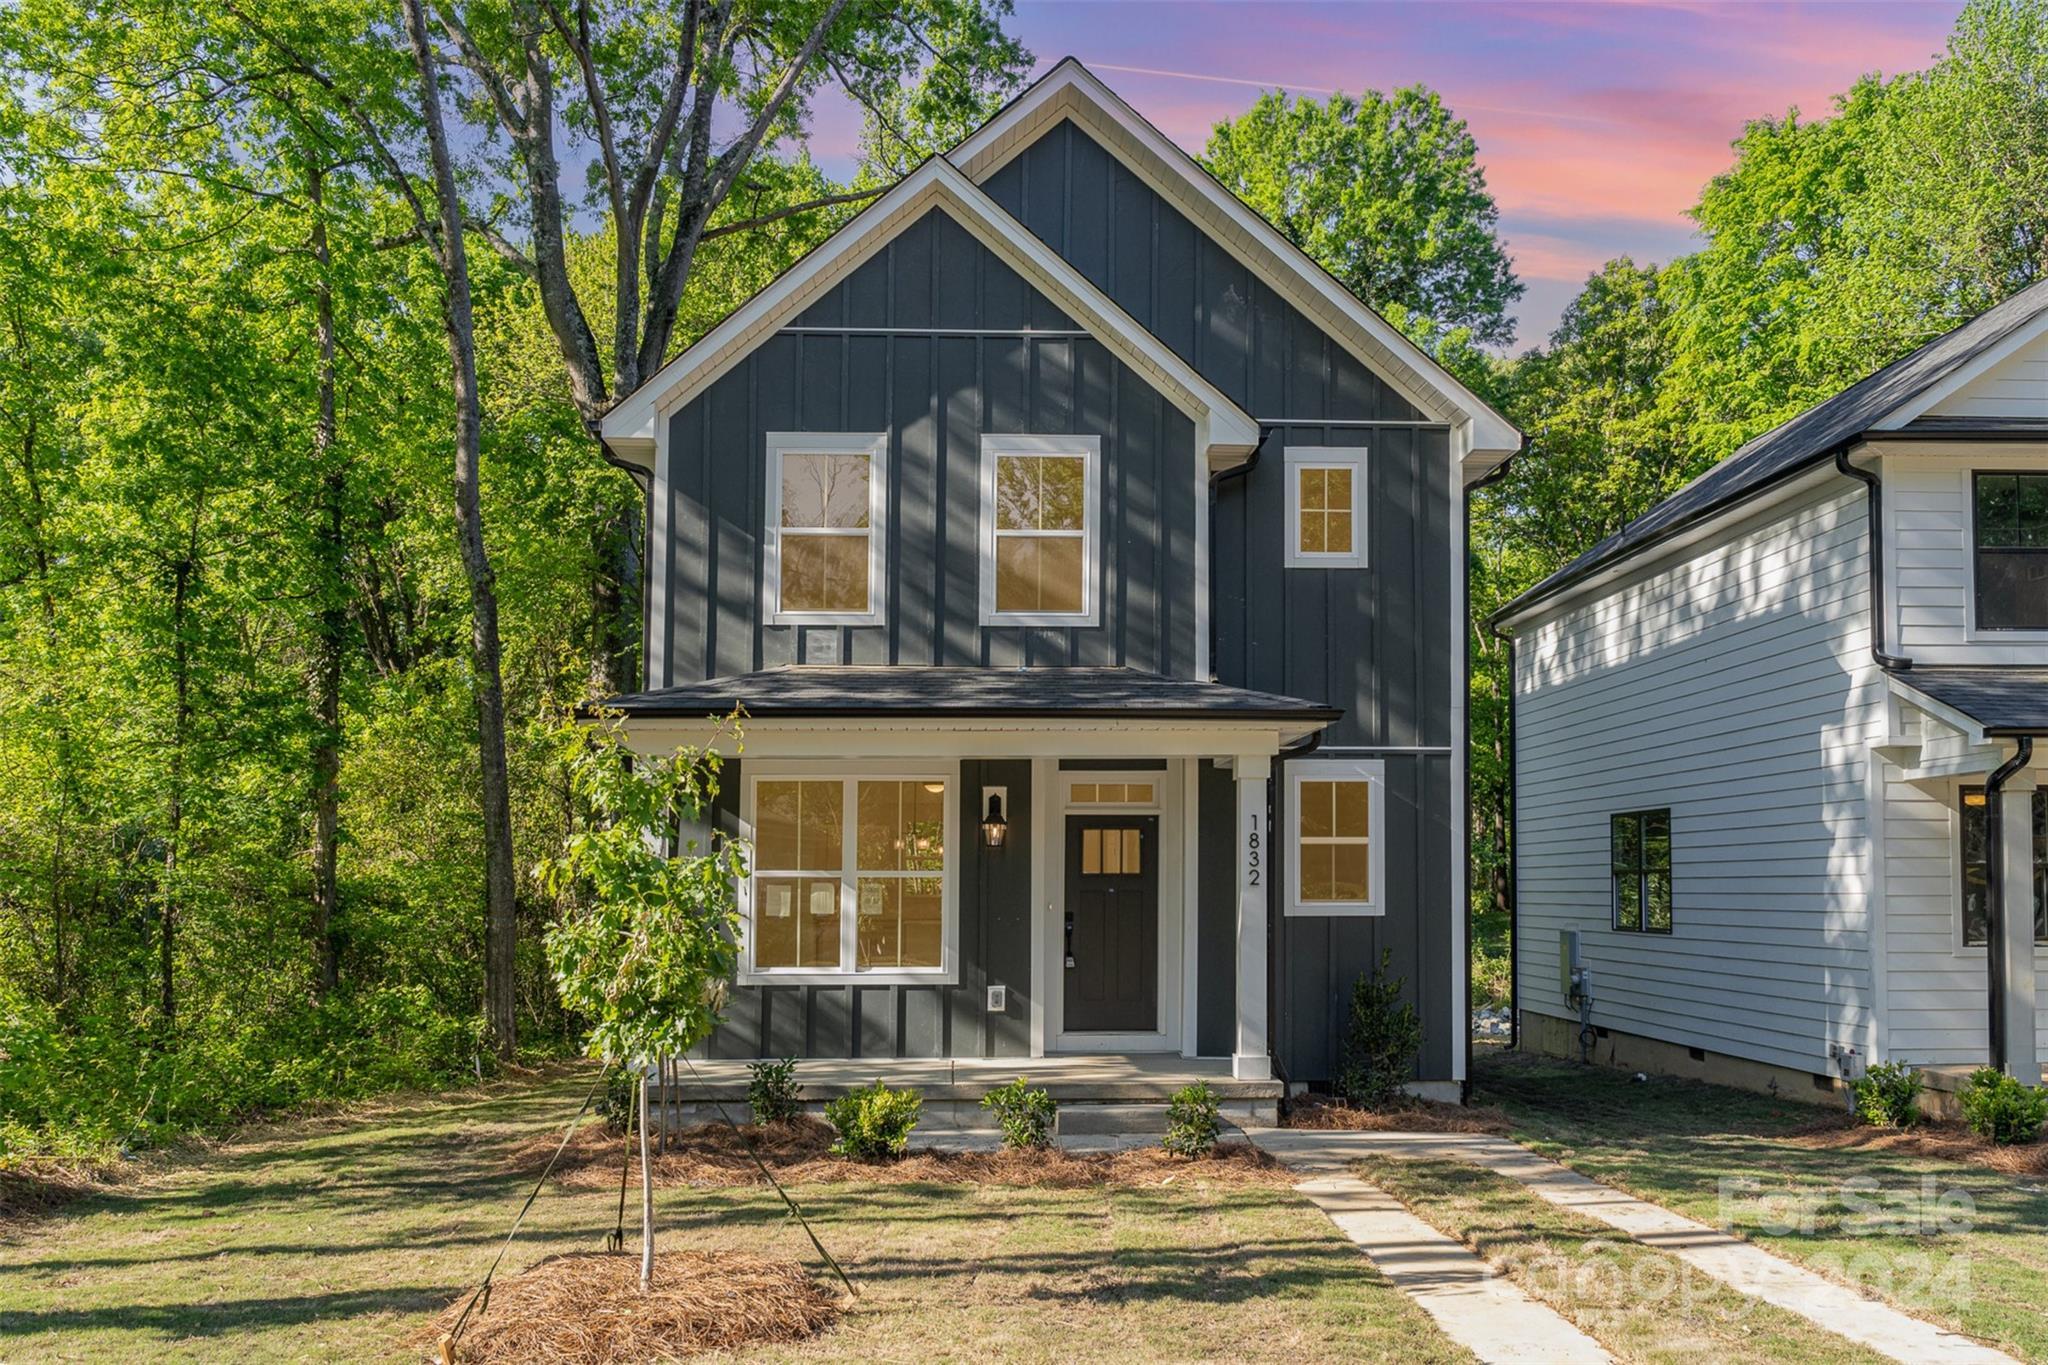 Photo one of 1832 Purser Dr Charlotte NC 28215 | MLS 4075728